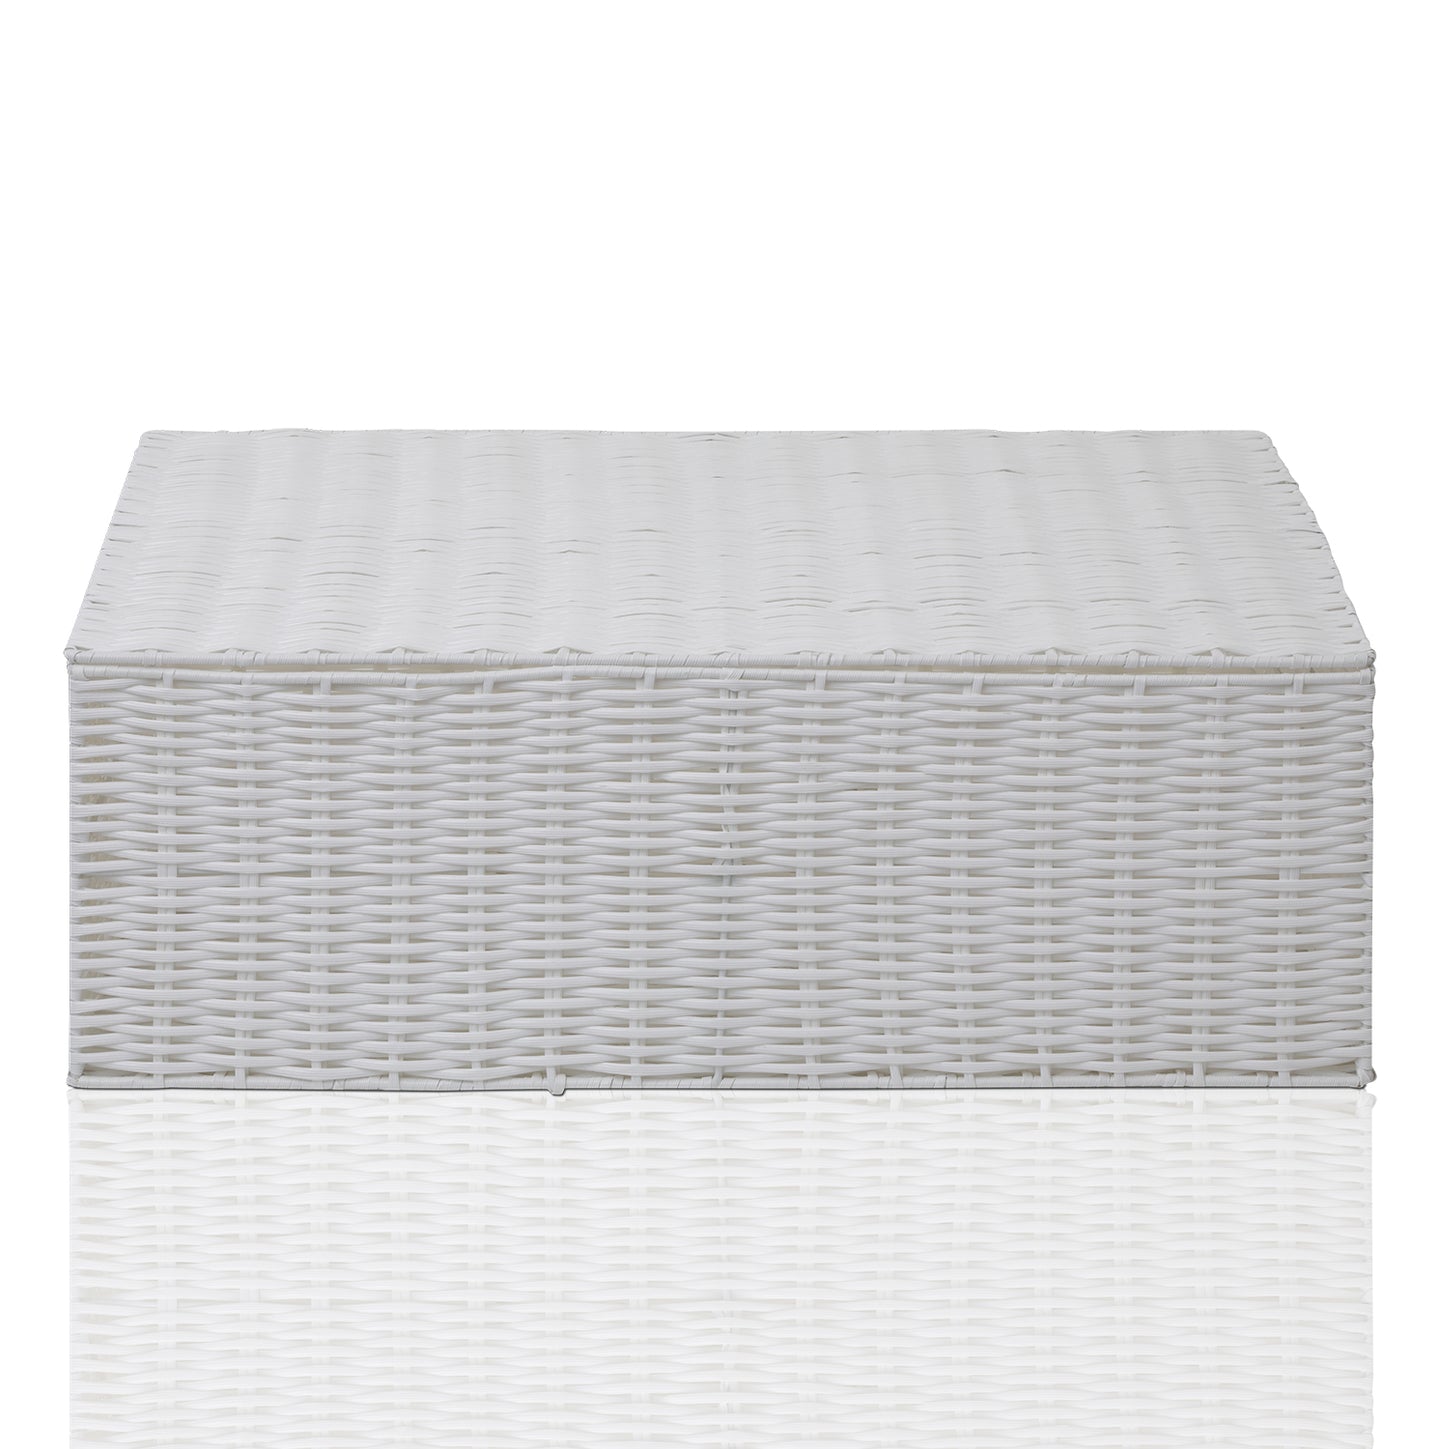 ARPAN Resin Woven Under Bed Storage Box, Chest Shelf Toy Clothes Basket With Lid - White